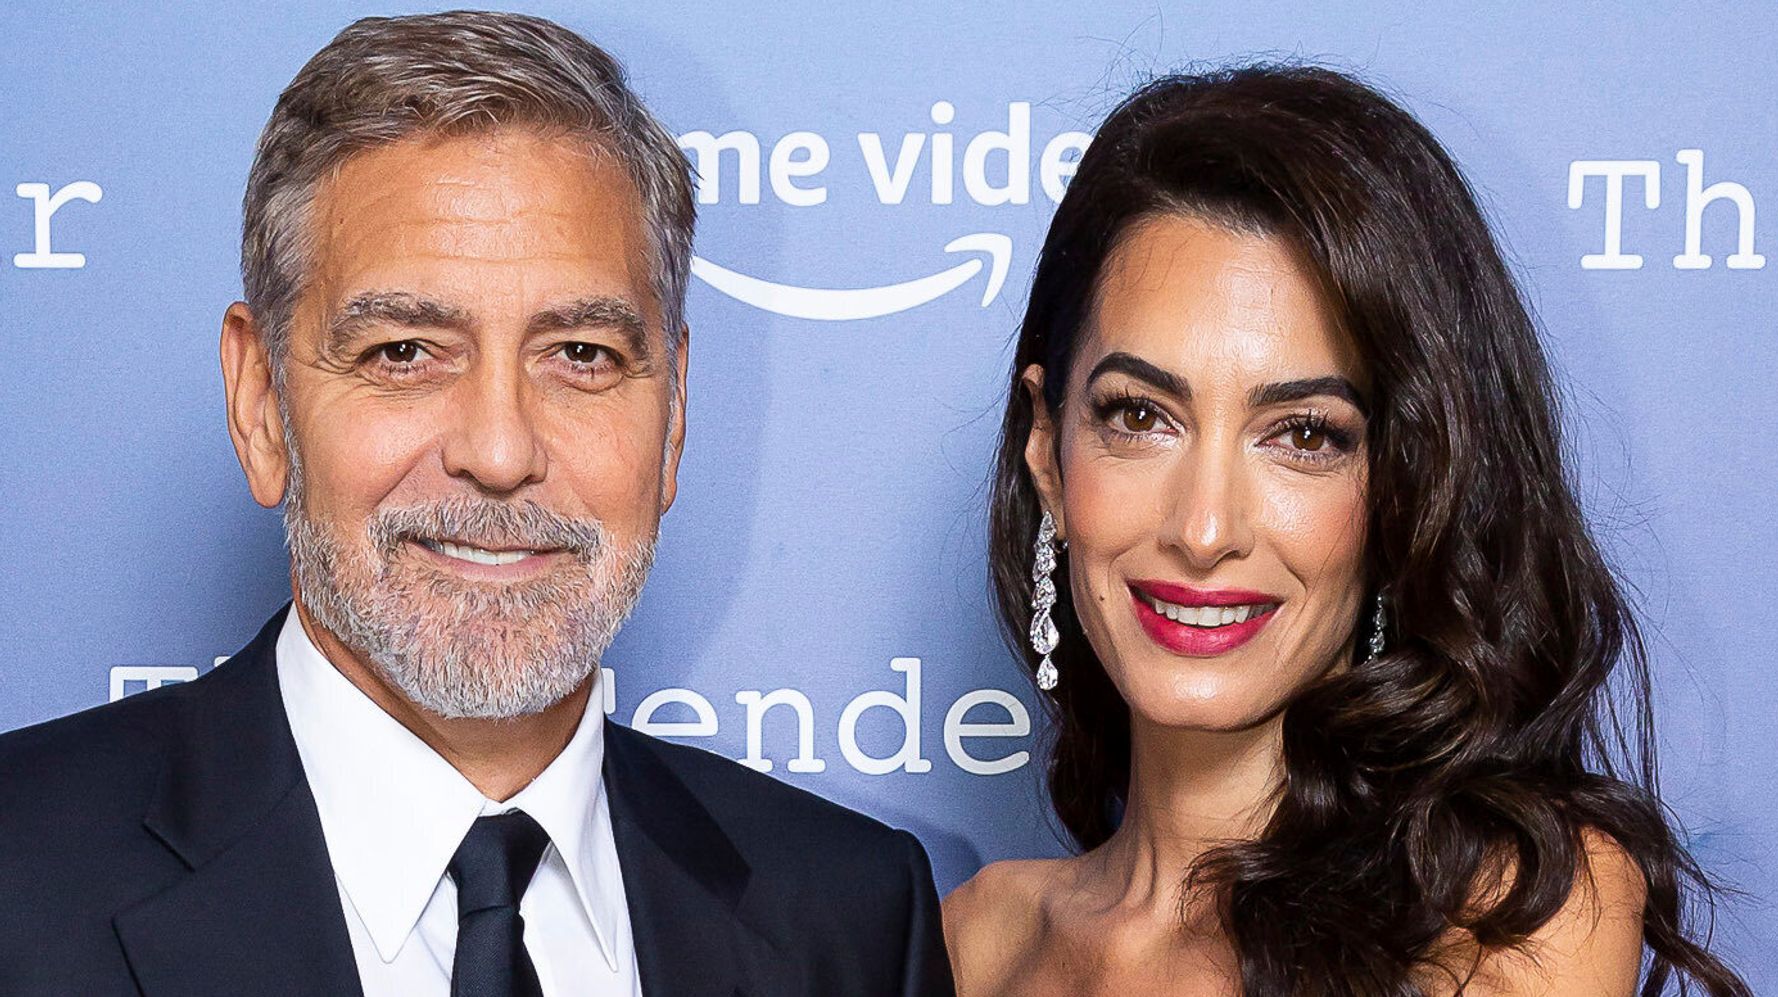 George Clooney Explains Why He Turned Down $35 Million For A Day's Work | HuffPost Entertainment